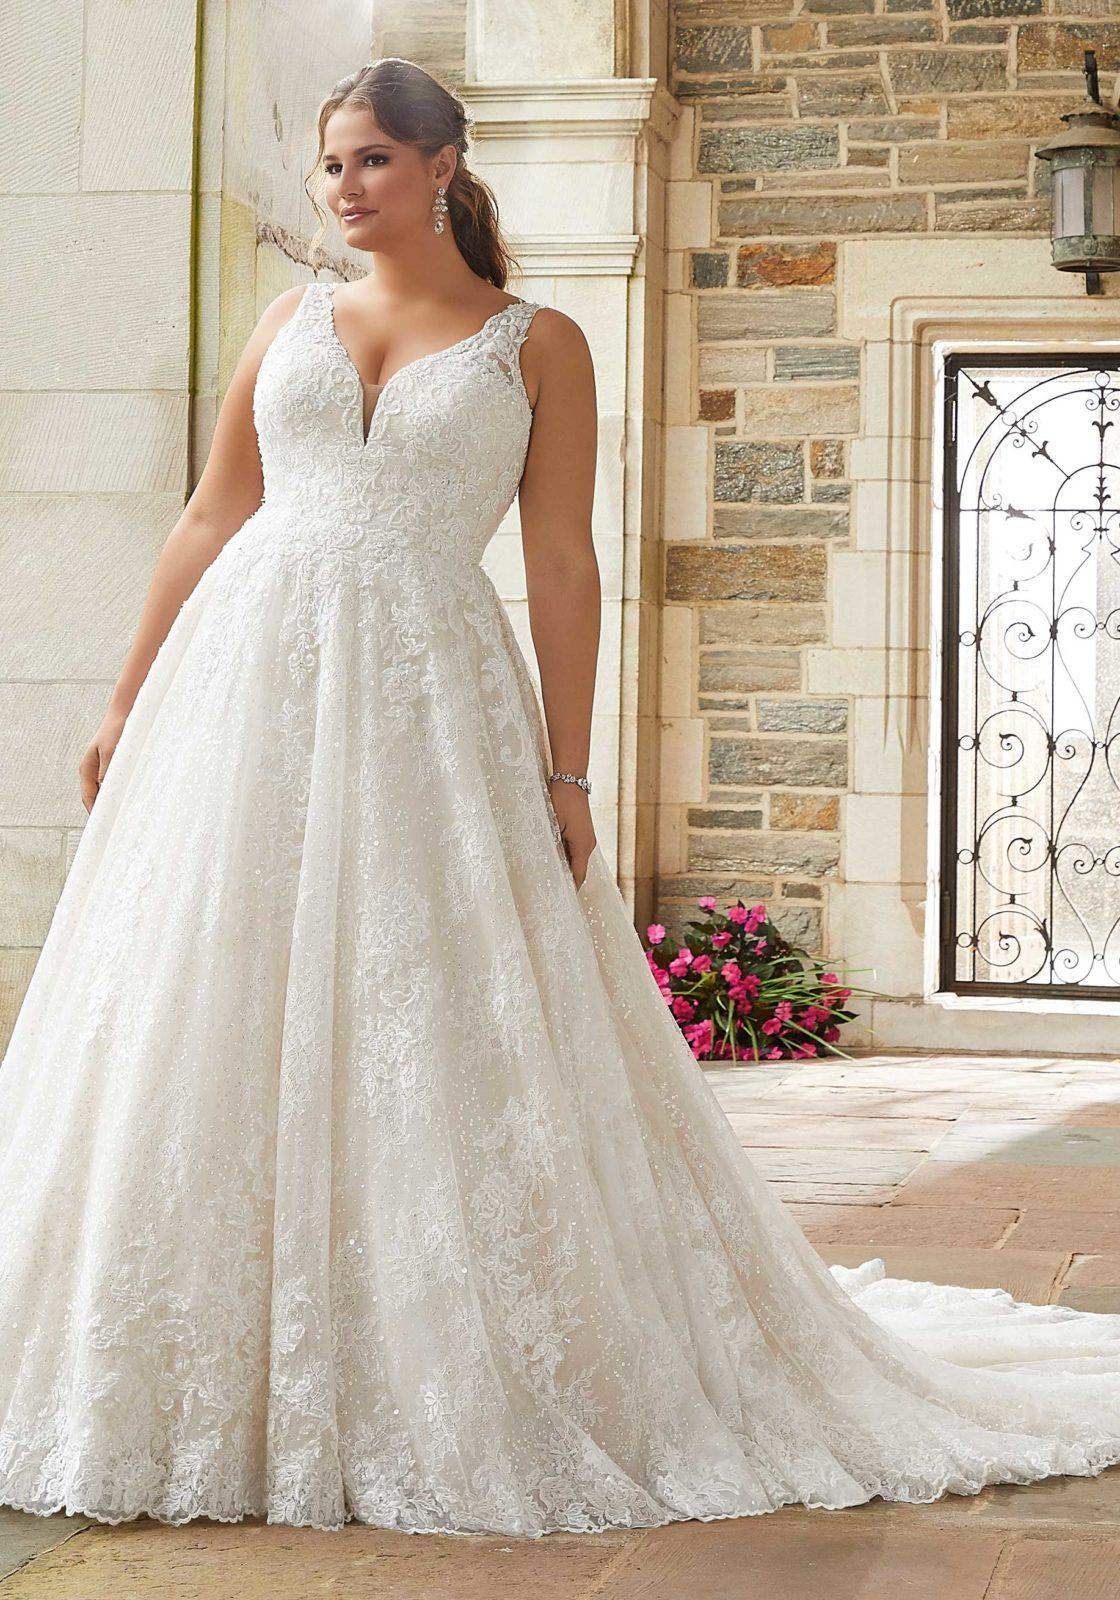 22 wedding dresses for big busts - hitched.co.uk